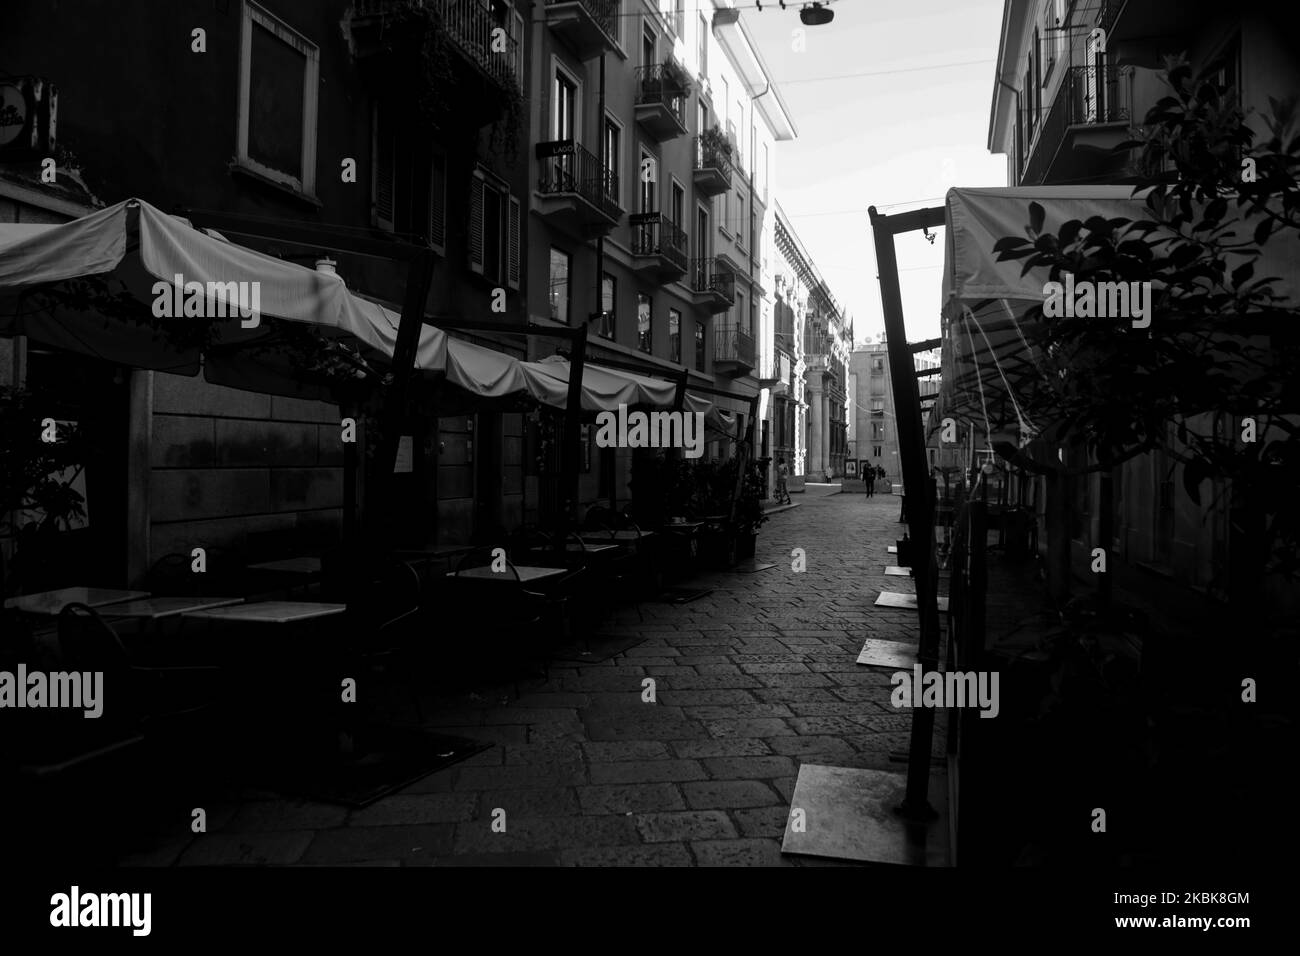 (EDITOR'S NOTE: This image has been converted to black and white.) General view of Brera district, March 19, 2020 in Milan, Italy. The Italian Government has strengthened up its quarantine rules, shutting all commercial activities except for pharmacies, food shops, gas stations, tobacco stores and news kiosks in a bid to stop the spread of the novel coronavirus. (Photo by Mairo Cinquetti/NurPhoto) Stock Photo